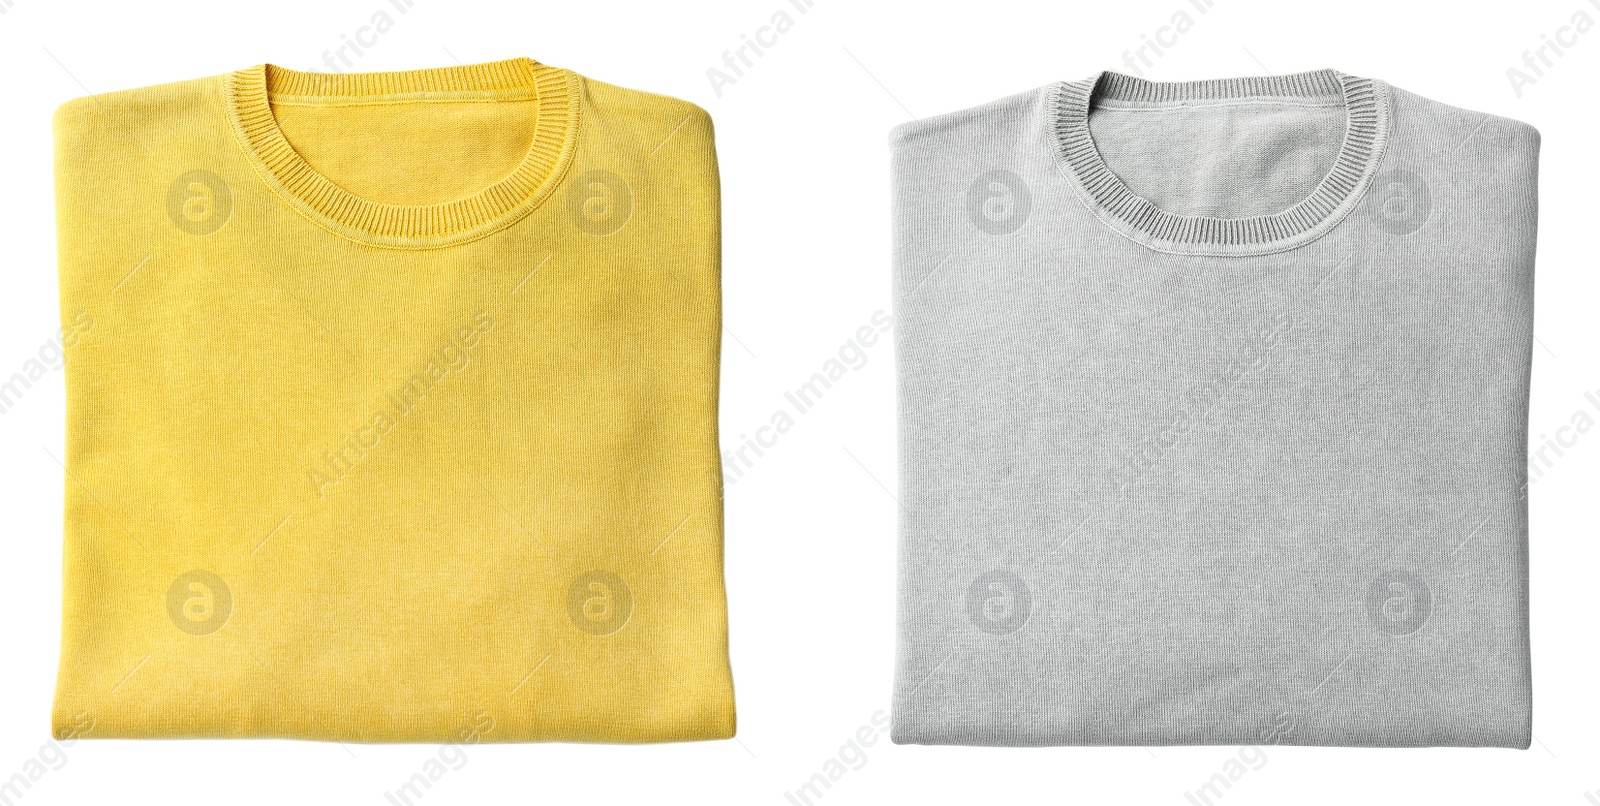 Image of Folded grey and yellow sweaters on white background, top view